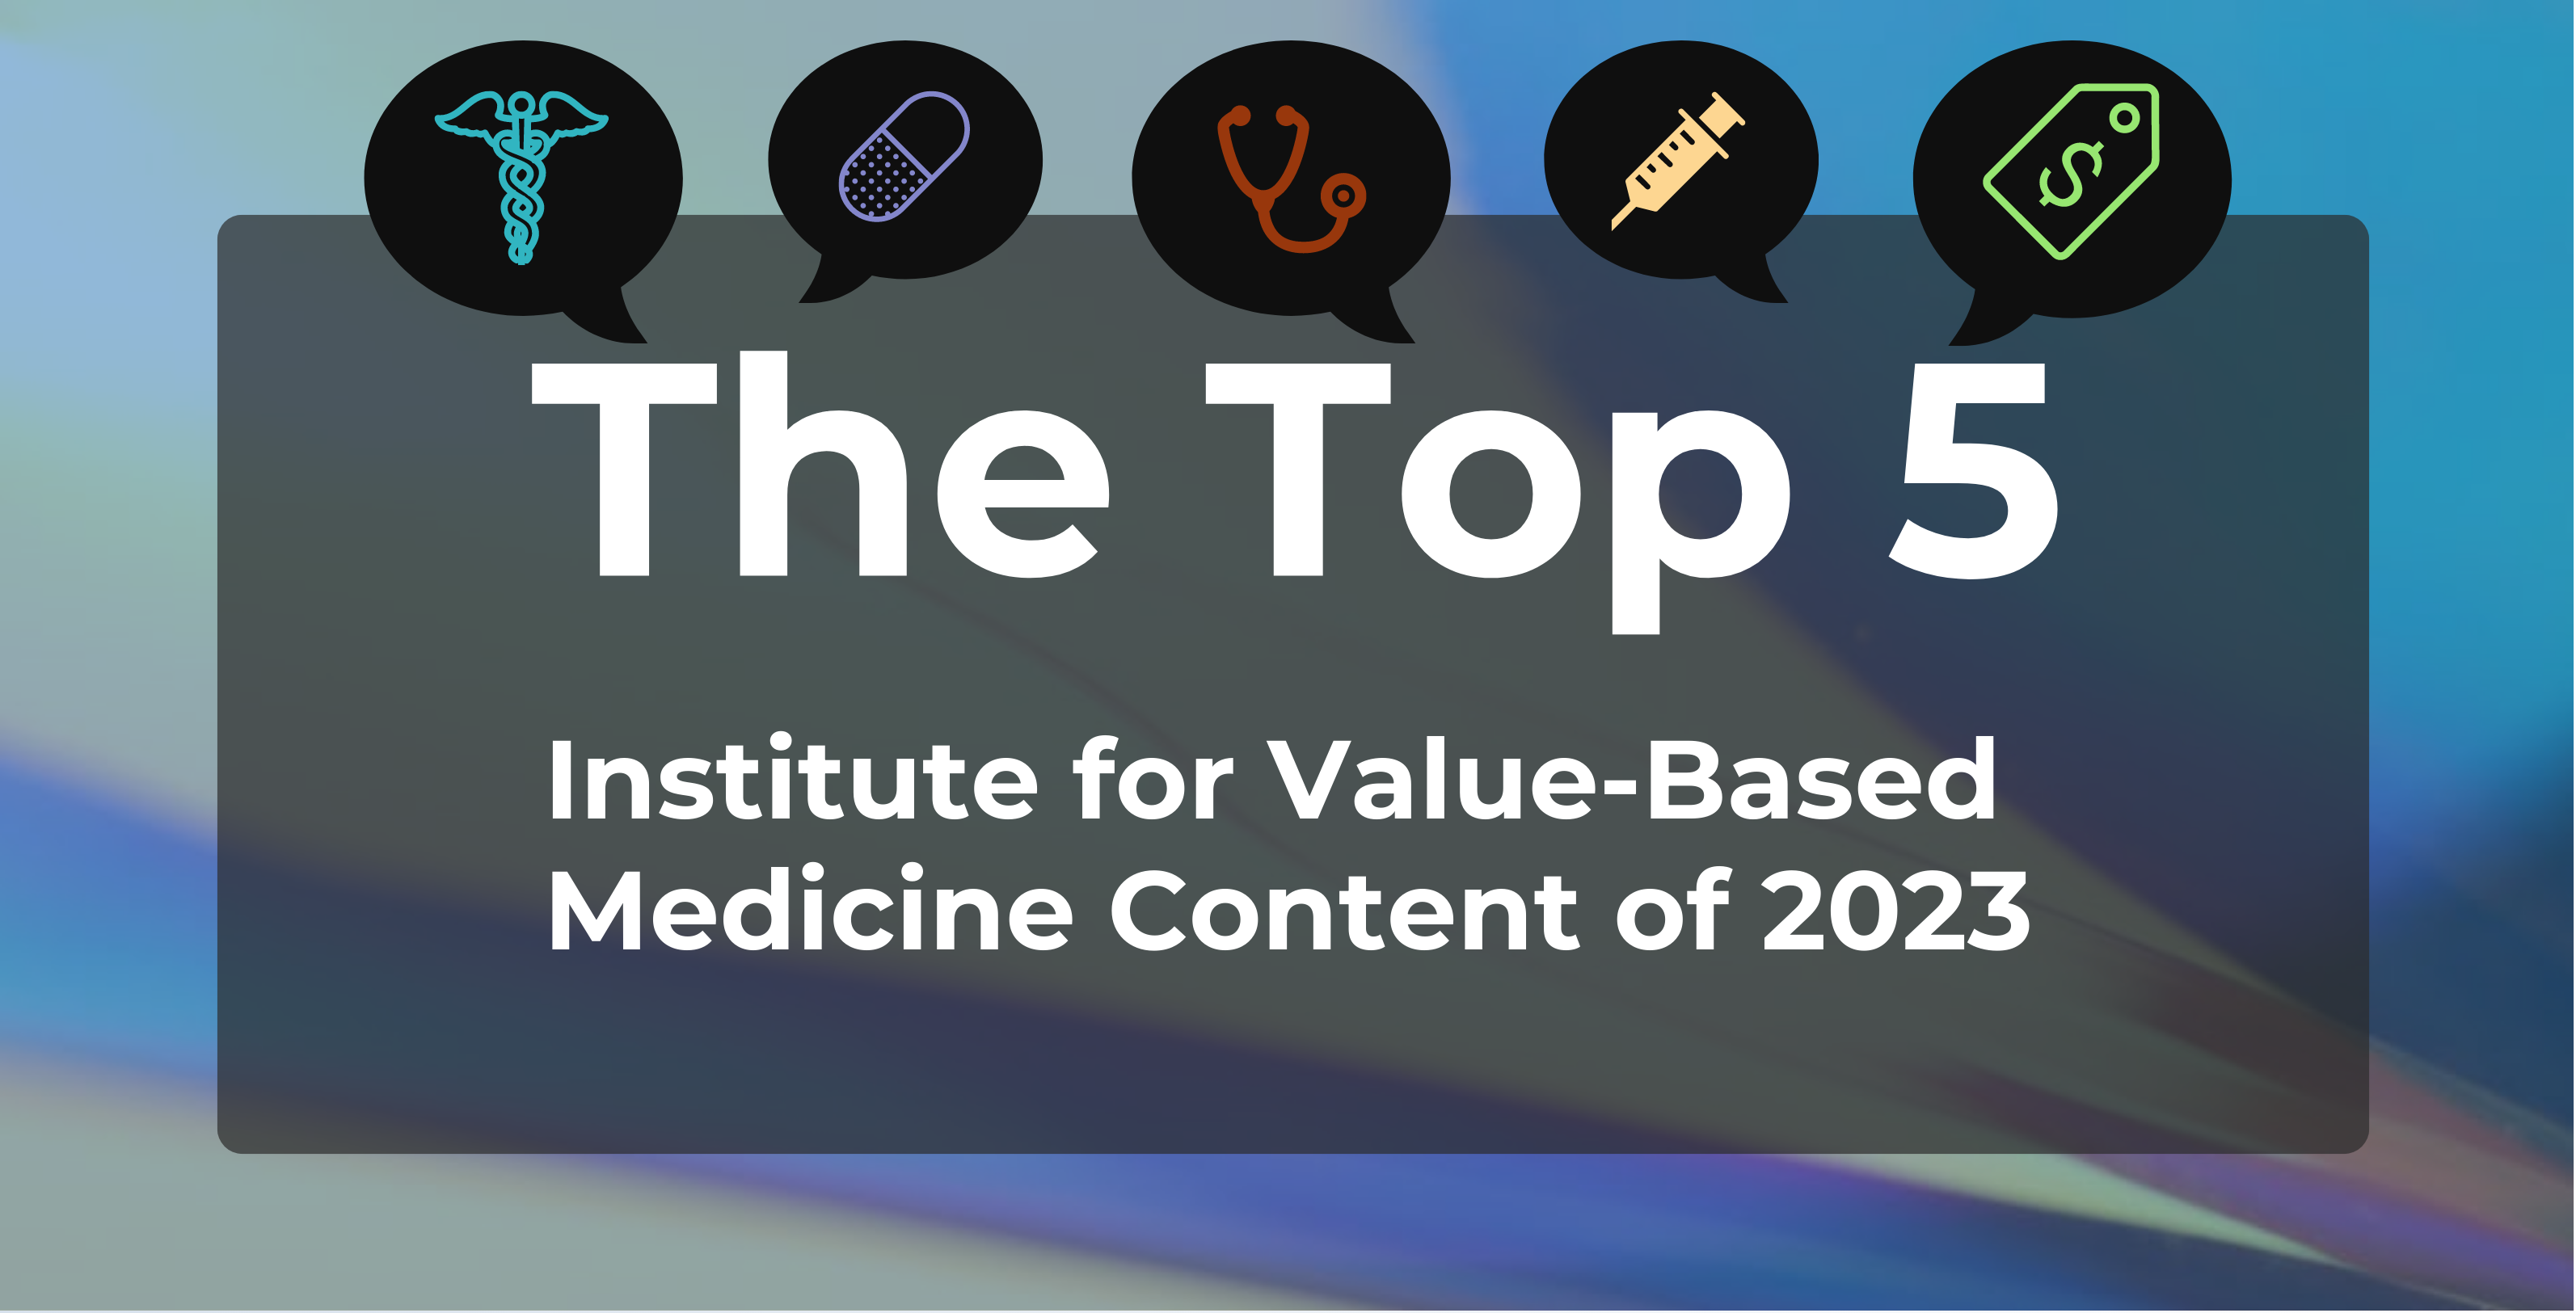 The top 5 Institute for Value-Based Medicine content of 2023